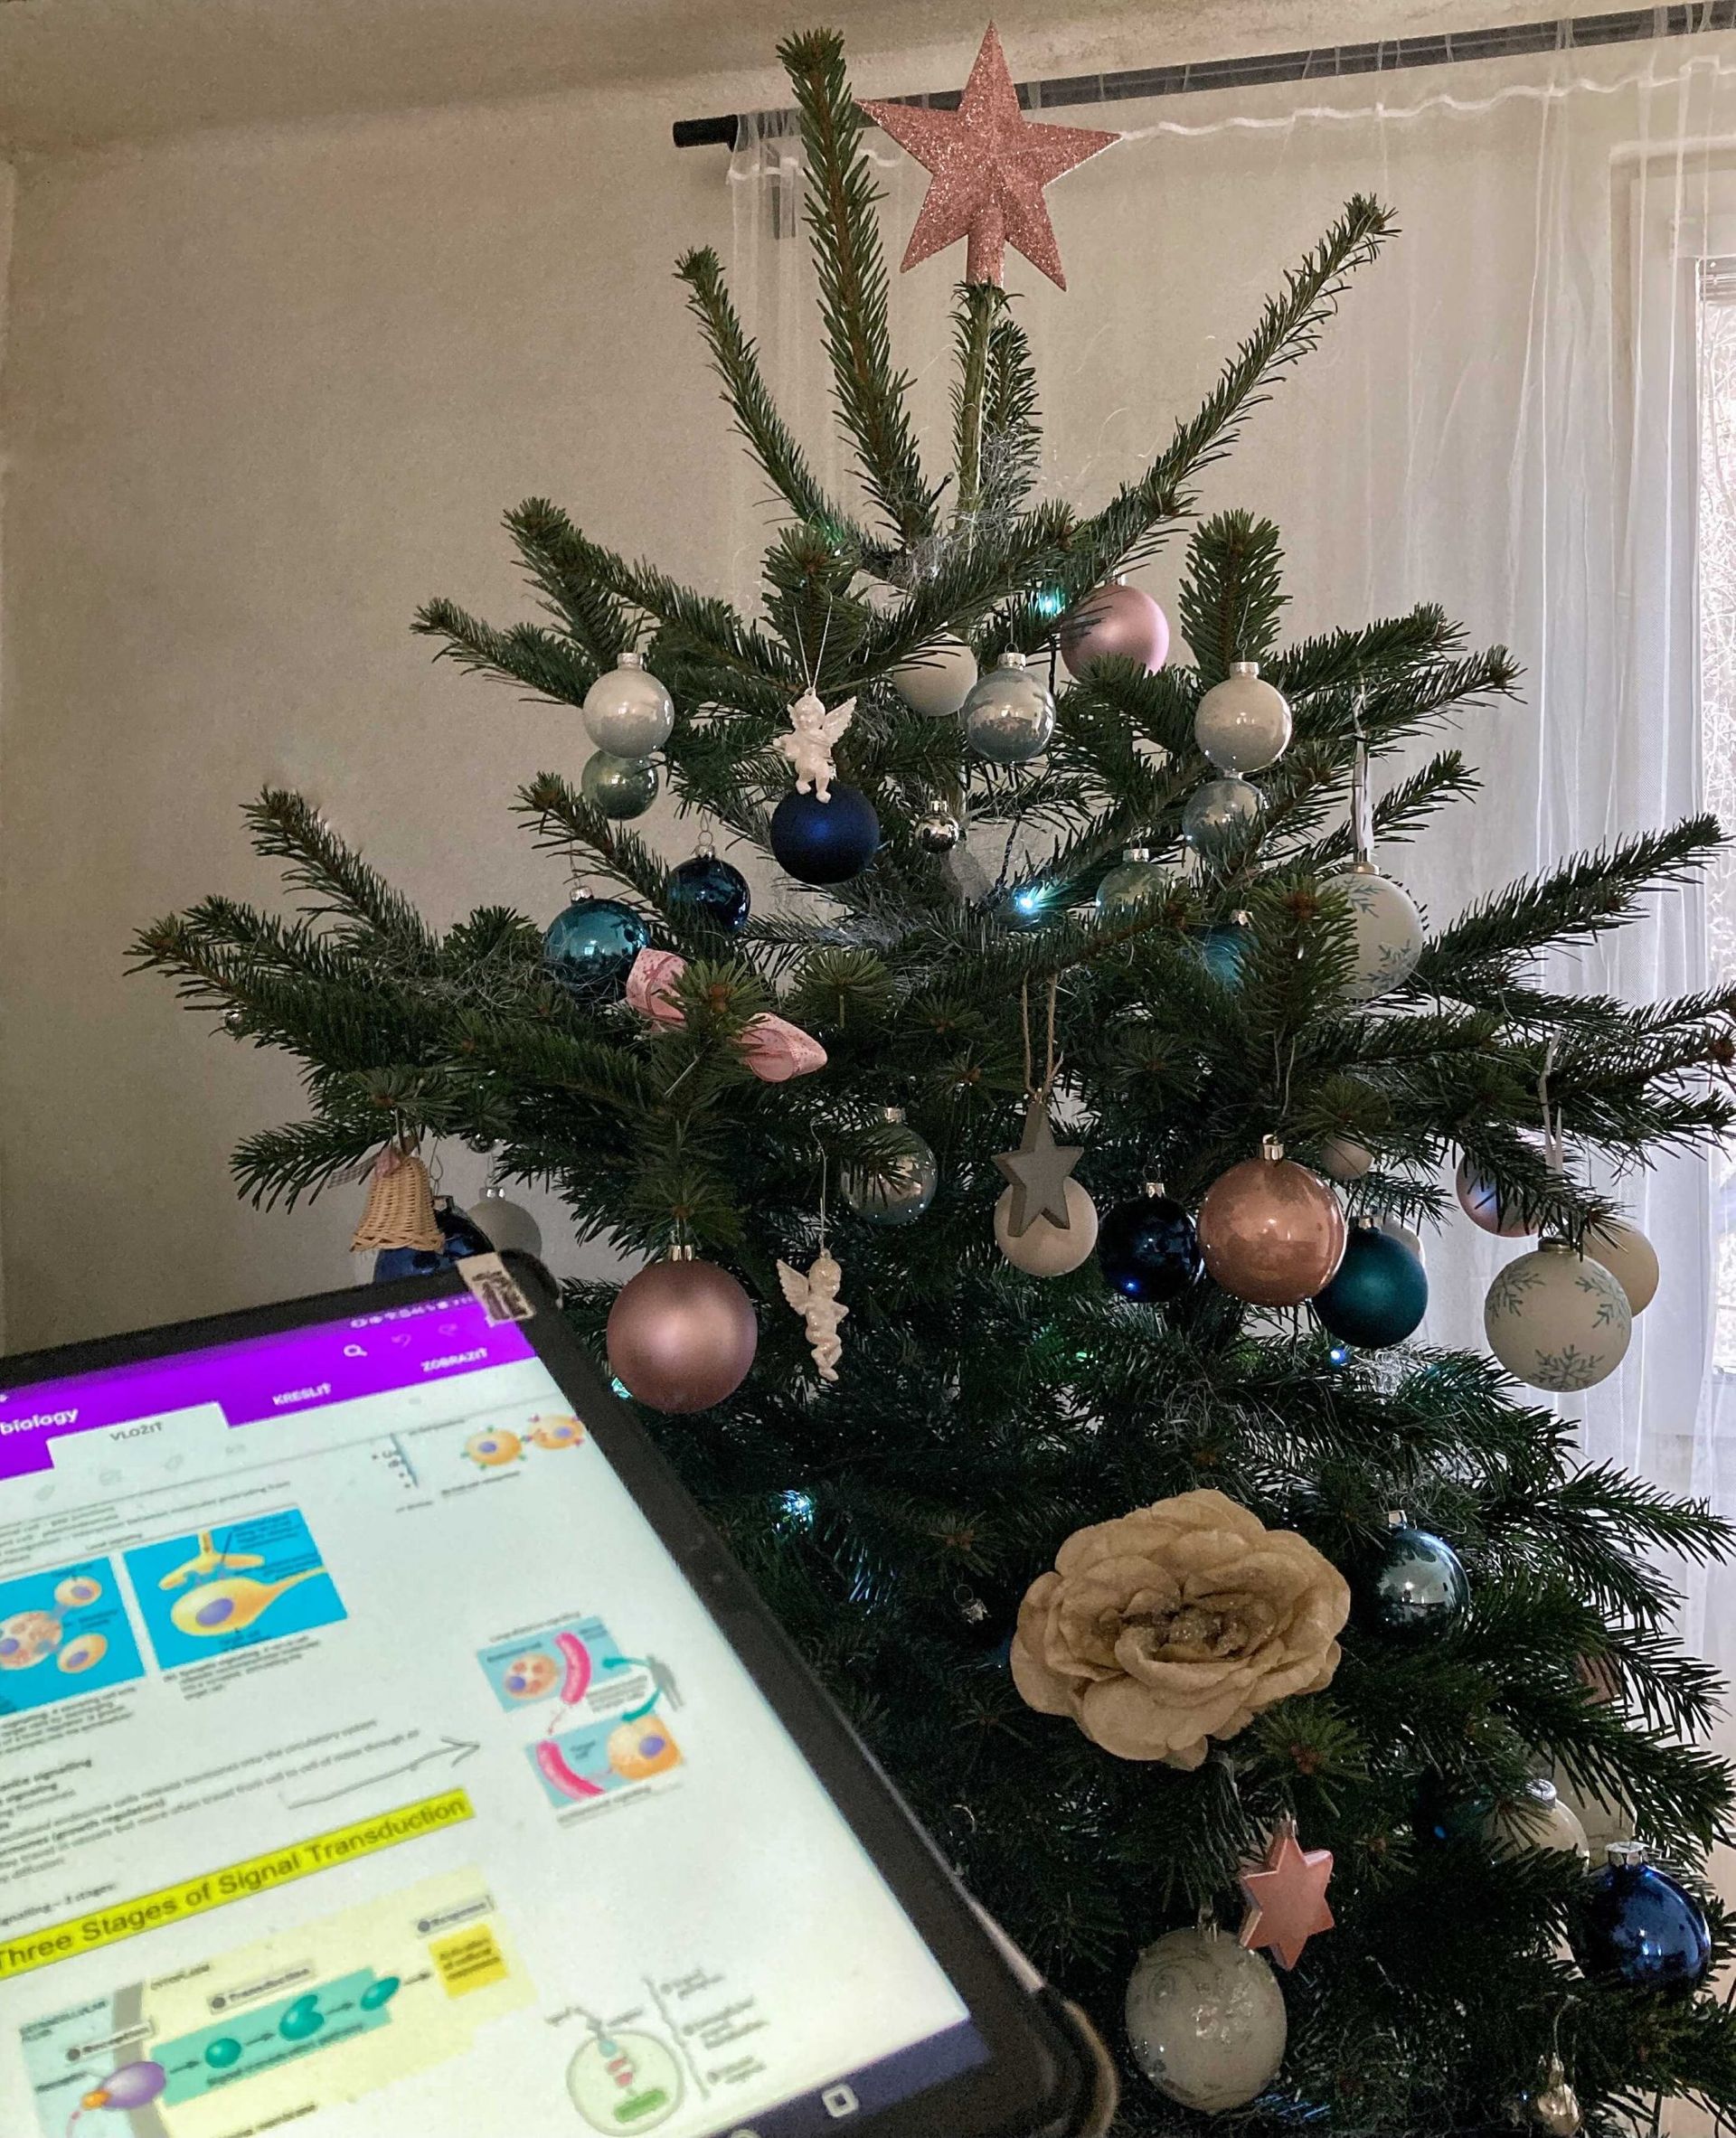 Tablet with notes in front of a Christmas tree.